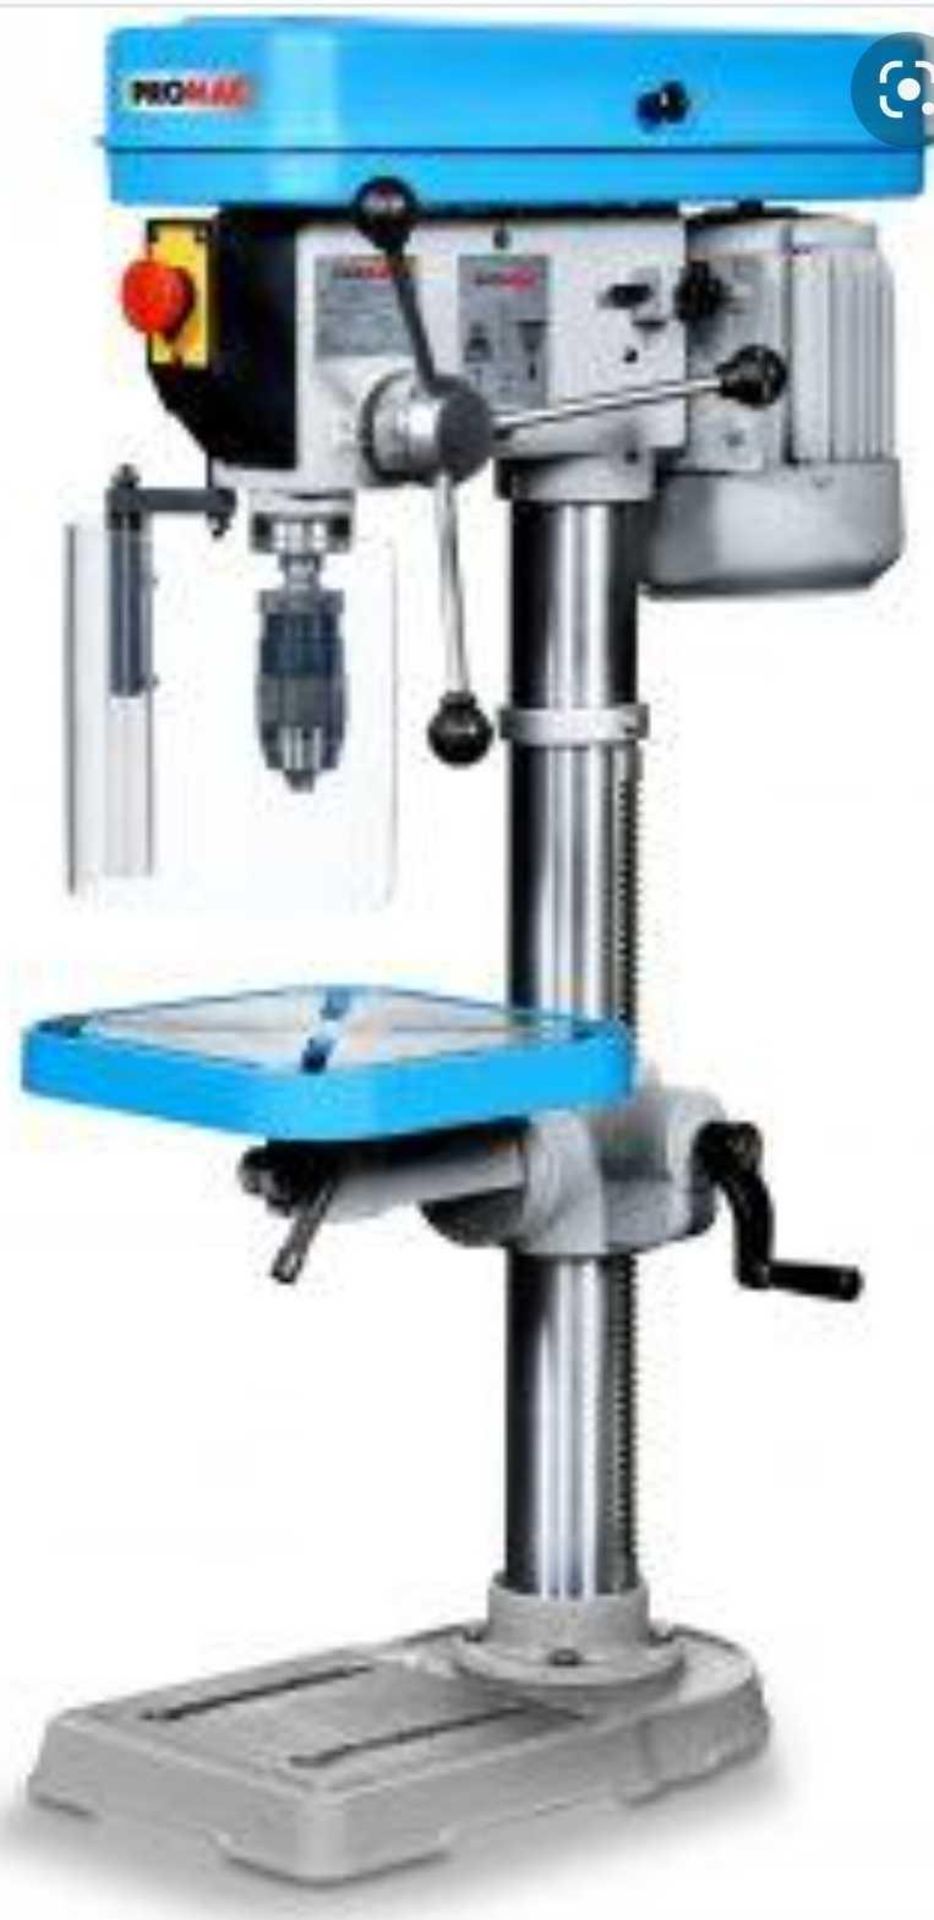 RRP £910 Boxed Promac 372E Drill Press On Stand, 230V, 0.55Kw, Mt2, 12 Speeds 290 Rpm-2300 Rpm, Keyl